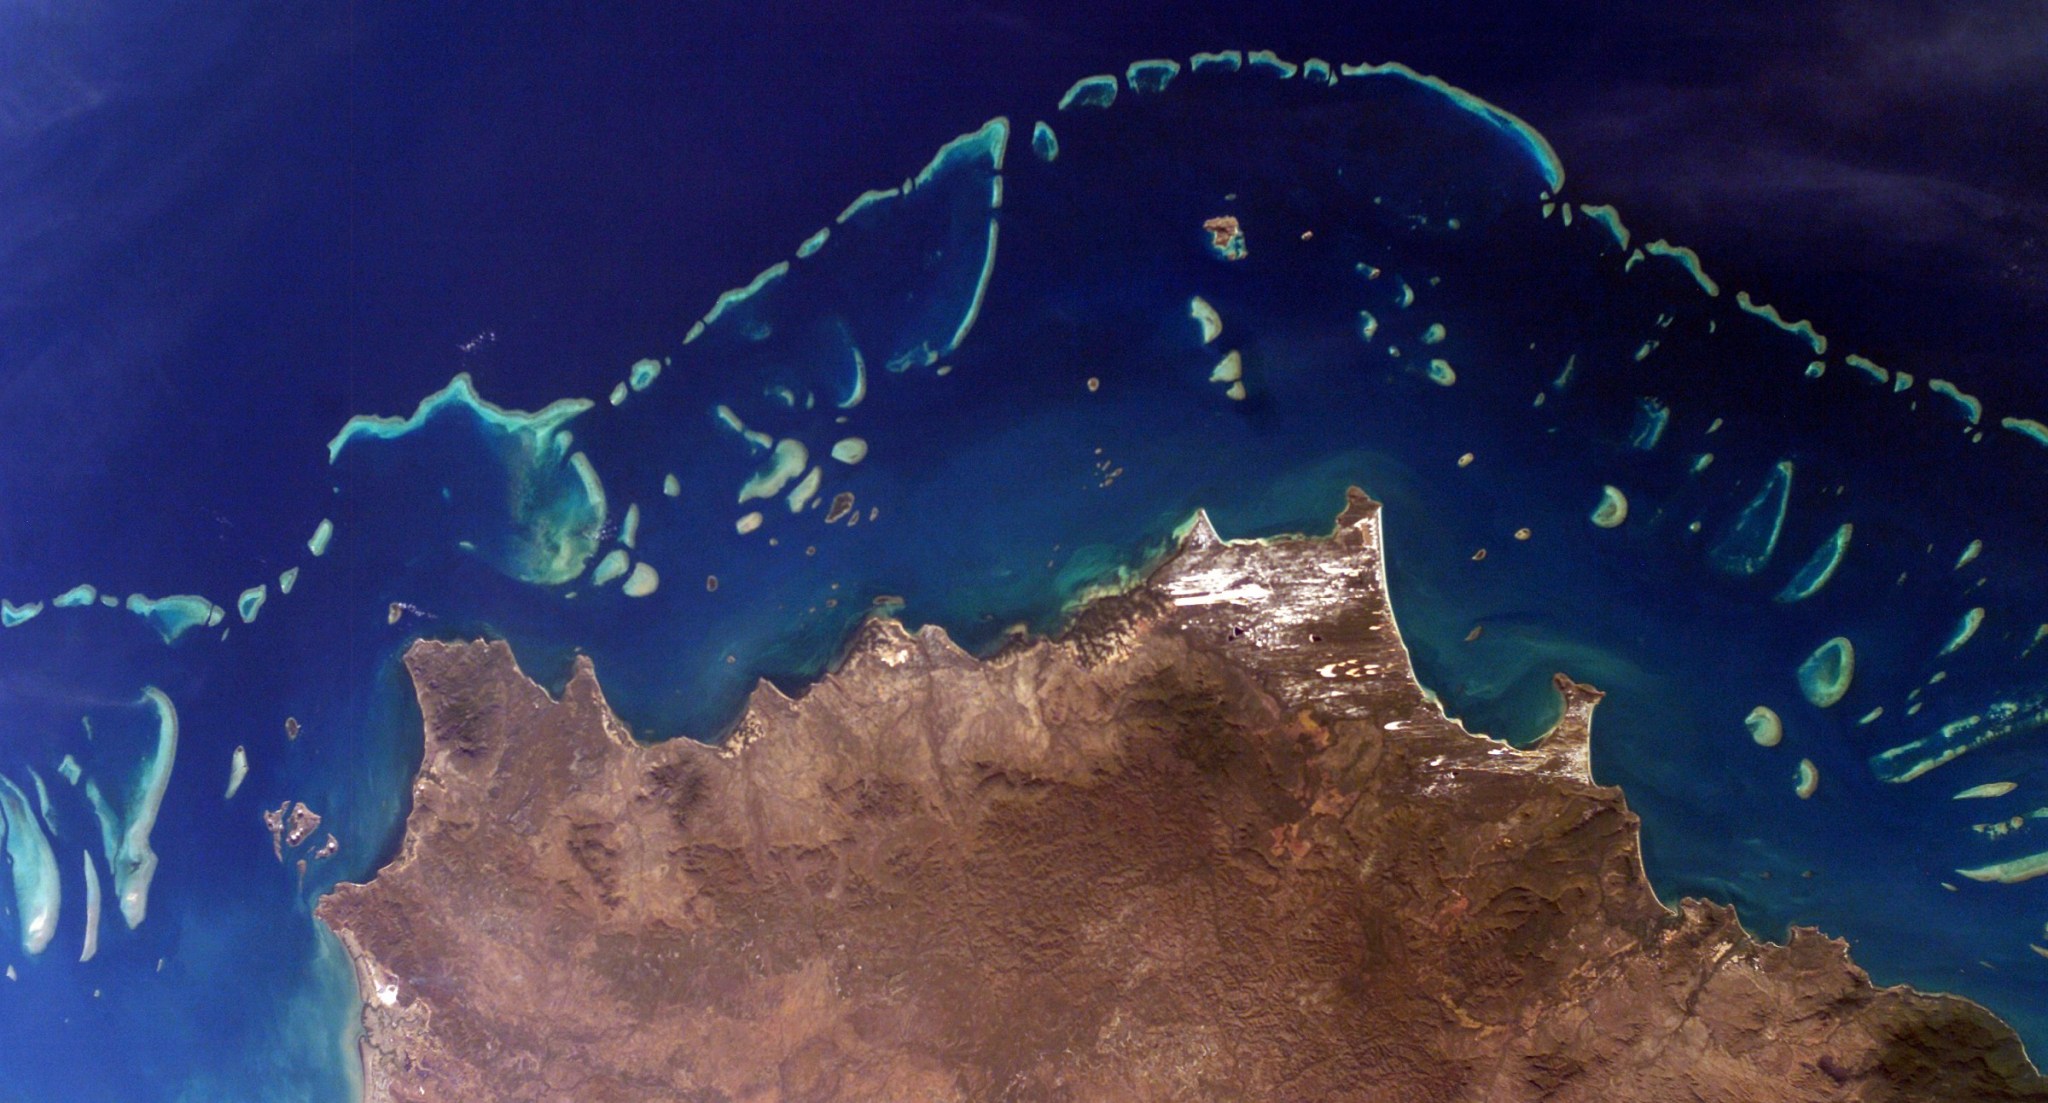 Part of Australia's Great Barrier Reef, one of many reefs that CORAL will study beginning this year.